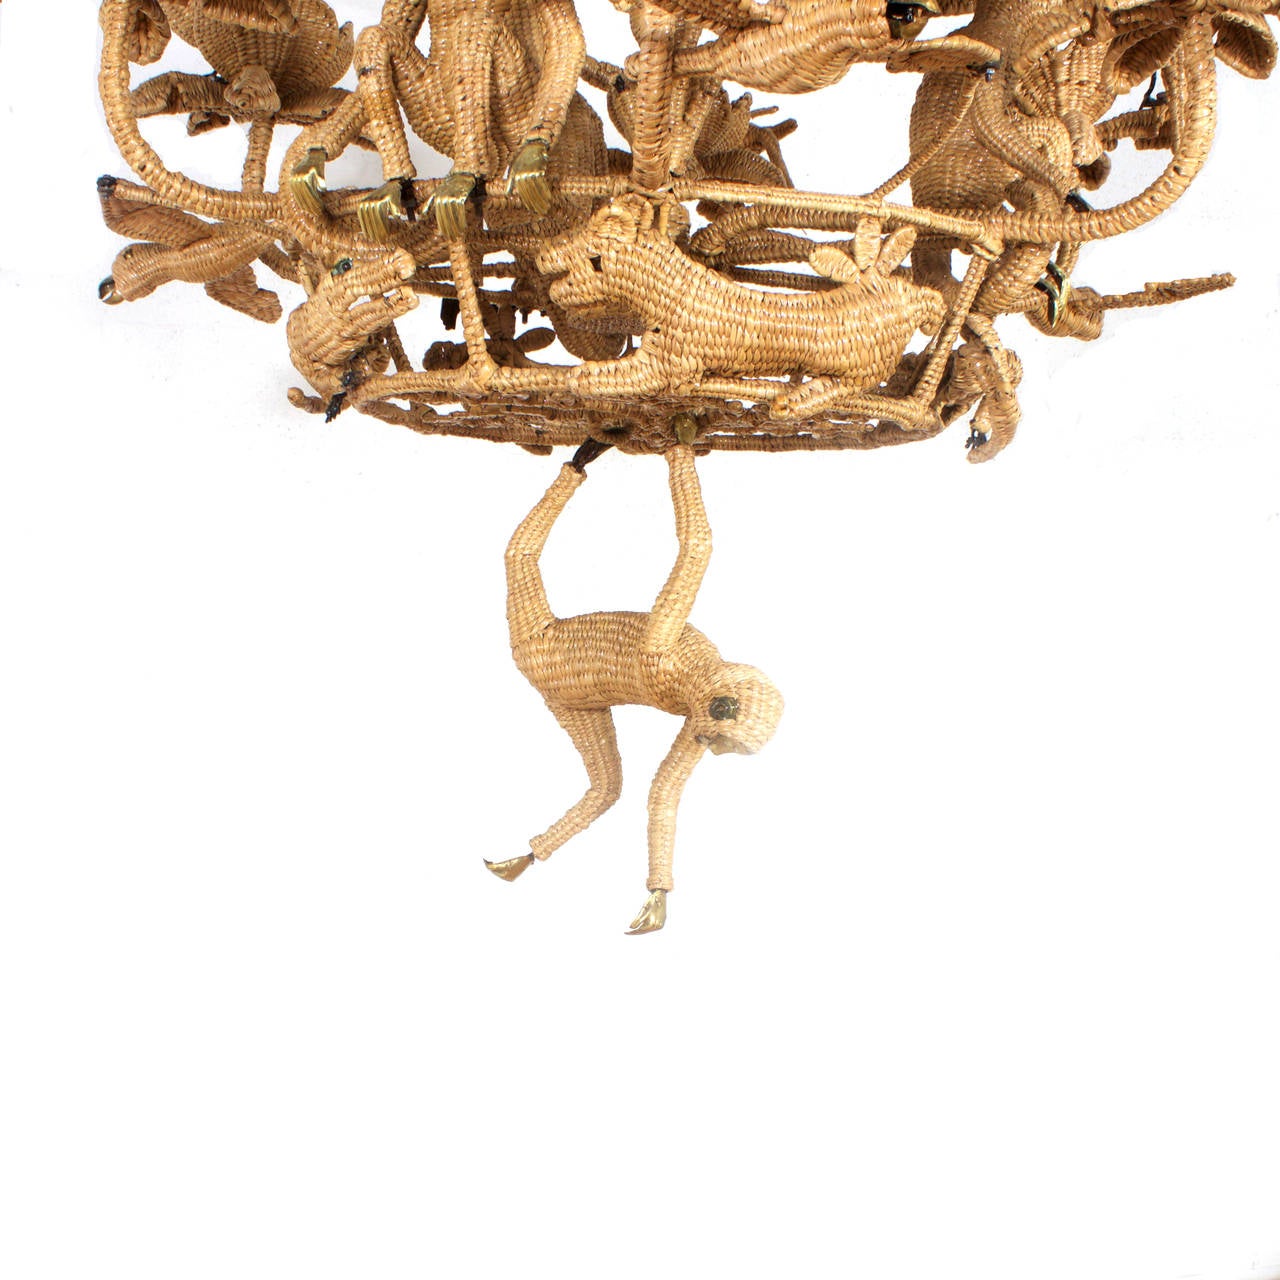 Mario Torres who is known for his whimsical wicker creations went all out with this six-light jungle chandelier. Featuring palm fronds, brass faced monkeys, toucans, cats, parrots, and alligators that are all assembled in one delightful composition.